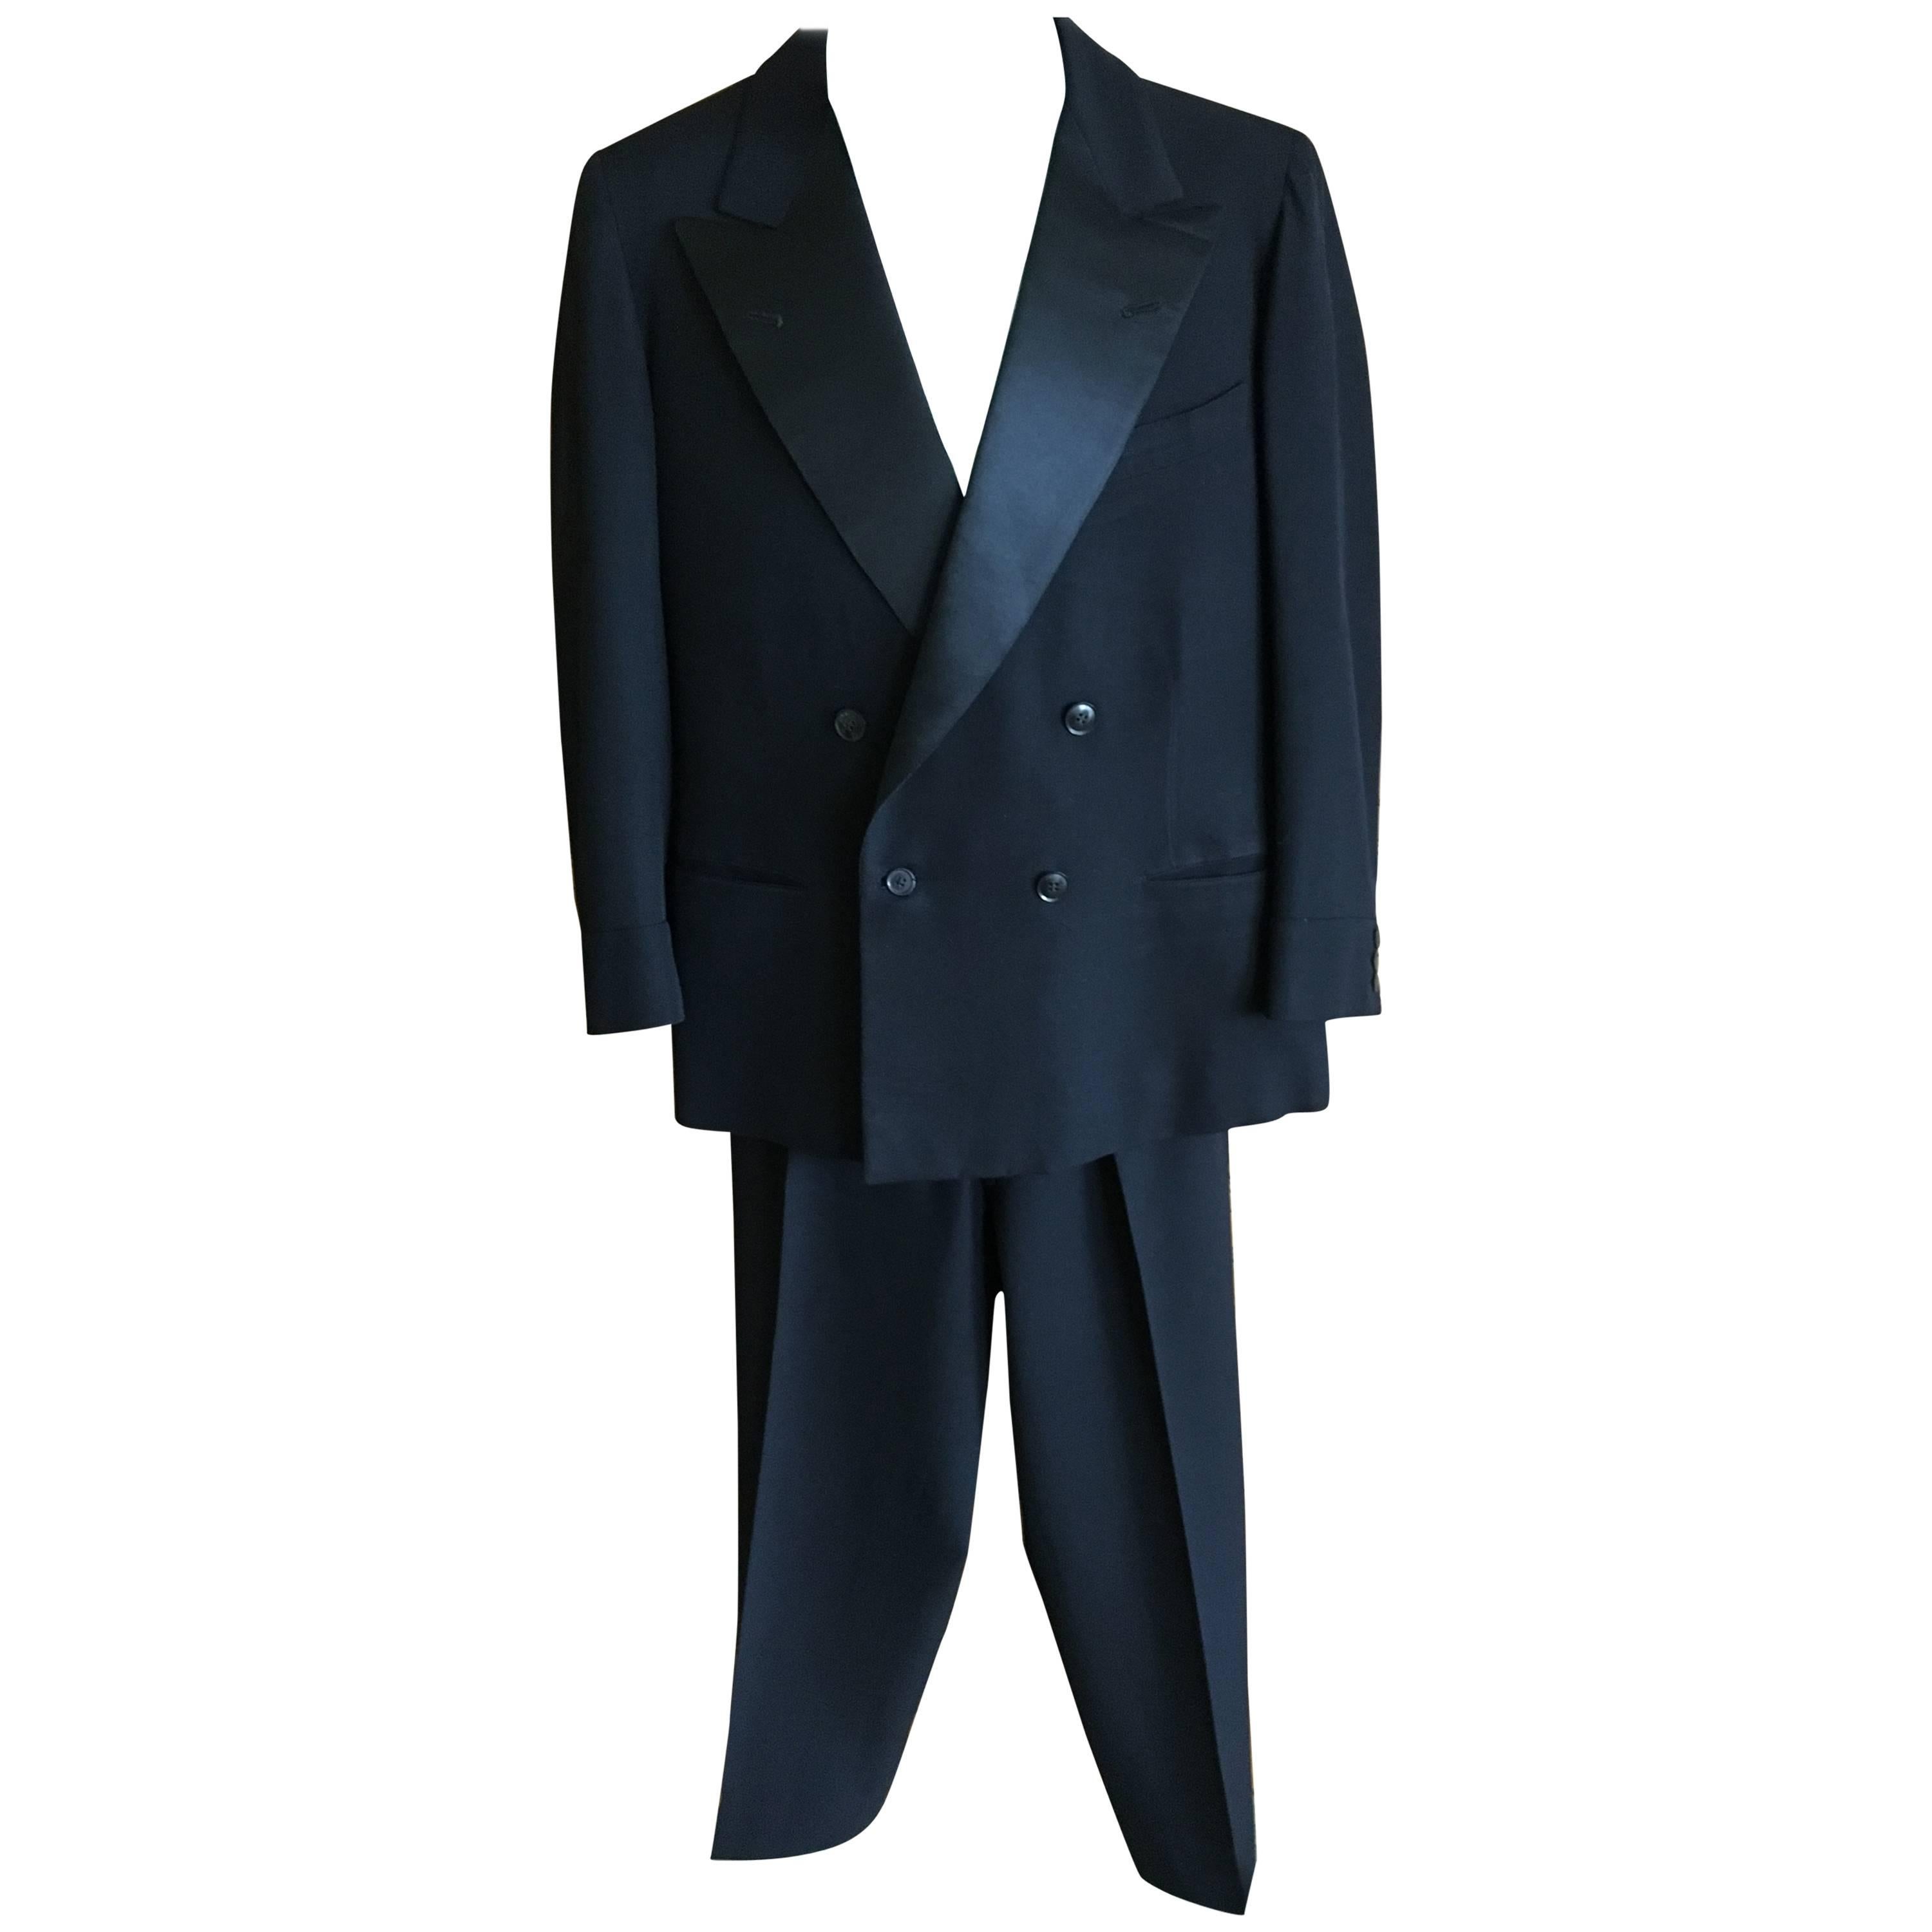 1936 Gentleman's Peak Satin Lapel Tuxedo from Society Tailor F.L. Dunne & Co. NY For Sale